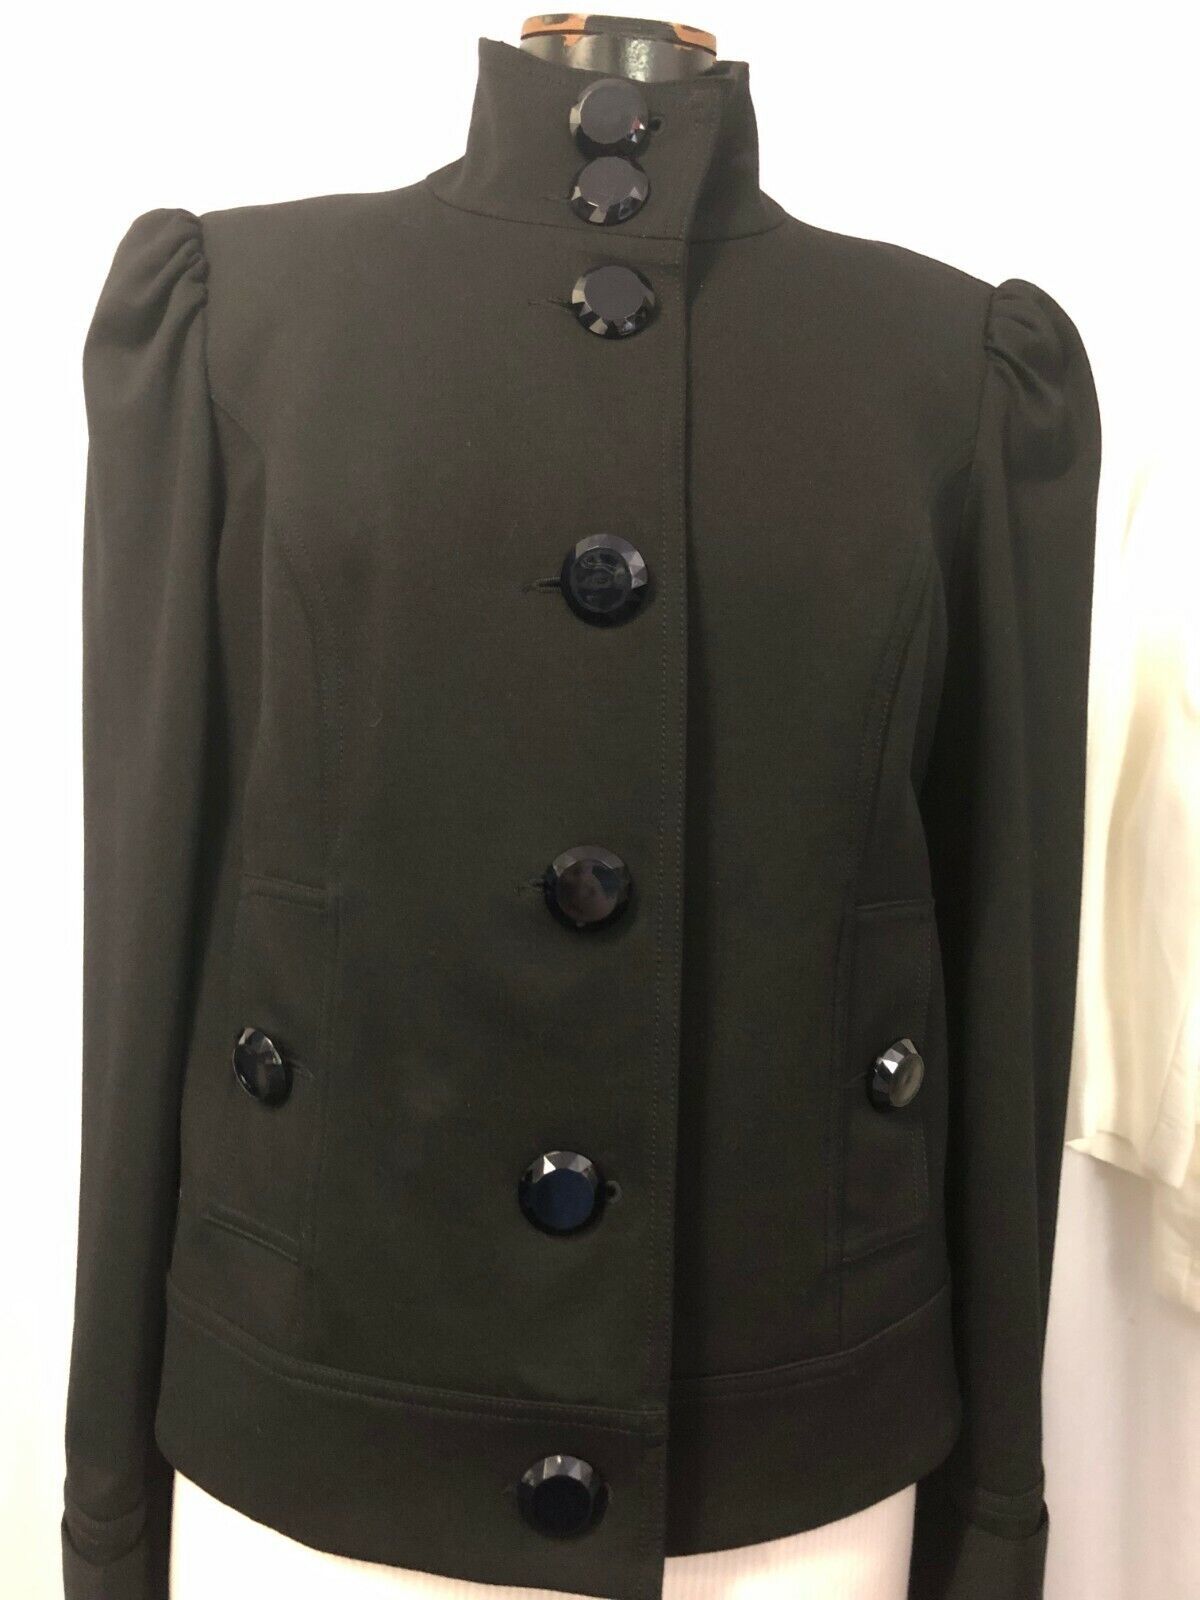 Primary image for INC Women's Jacket Black w/ Gem Buttons Size Large